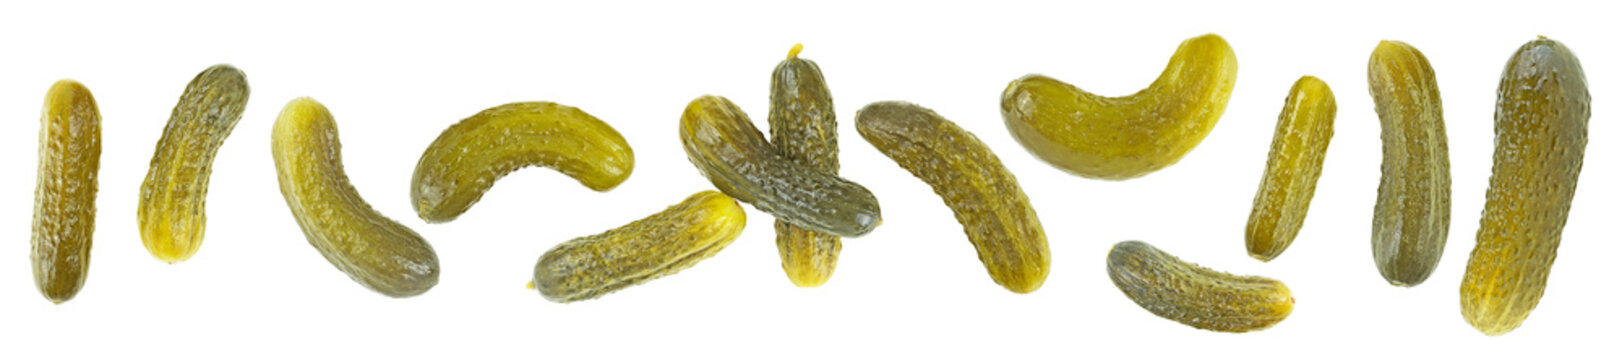 Group of pickled cucumbers isolated on a white background. Gherkins, top view.